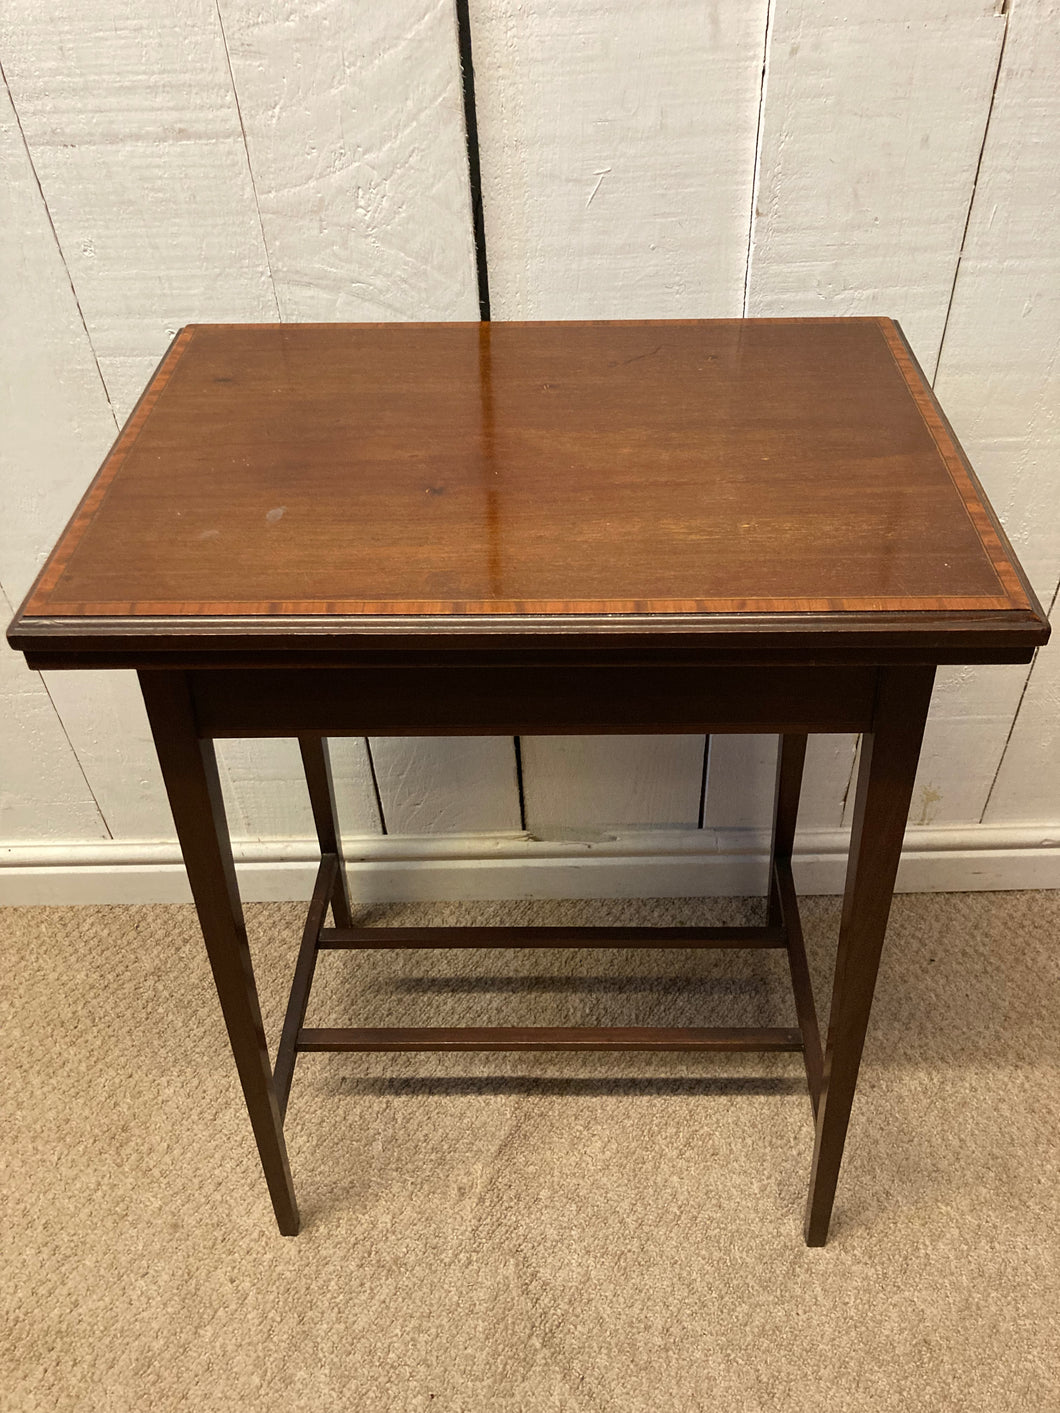 Edwardian Mahogany Inlaid Card Table Side/Lamp Table With Storage